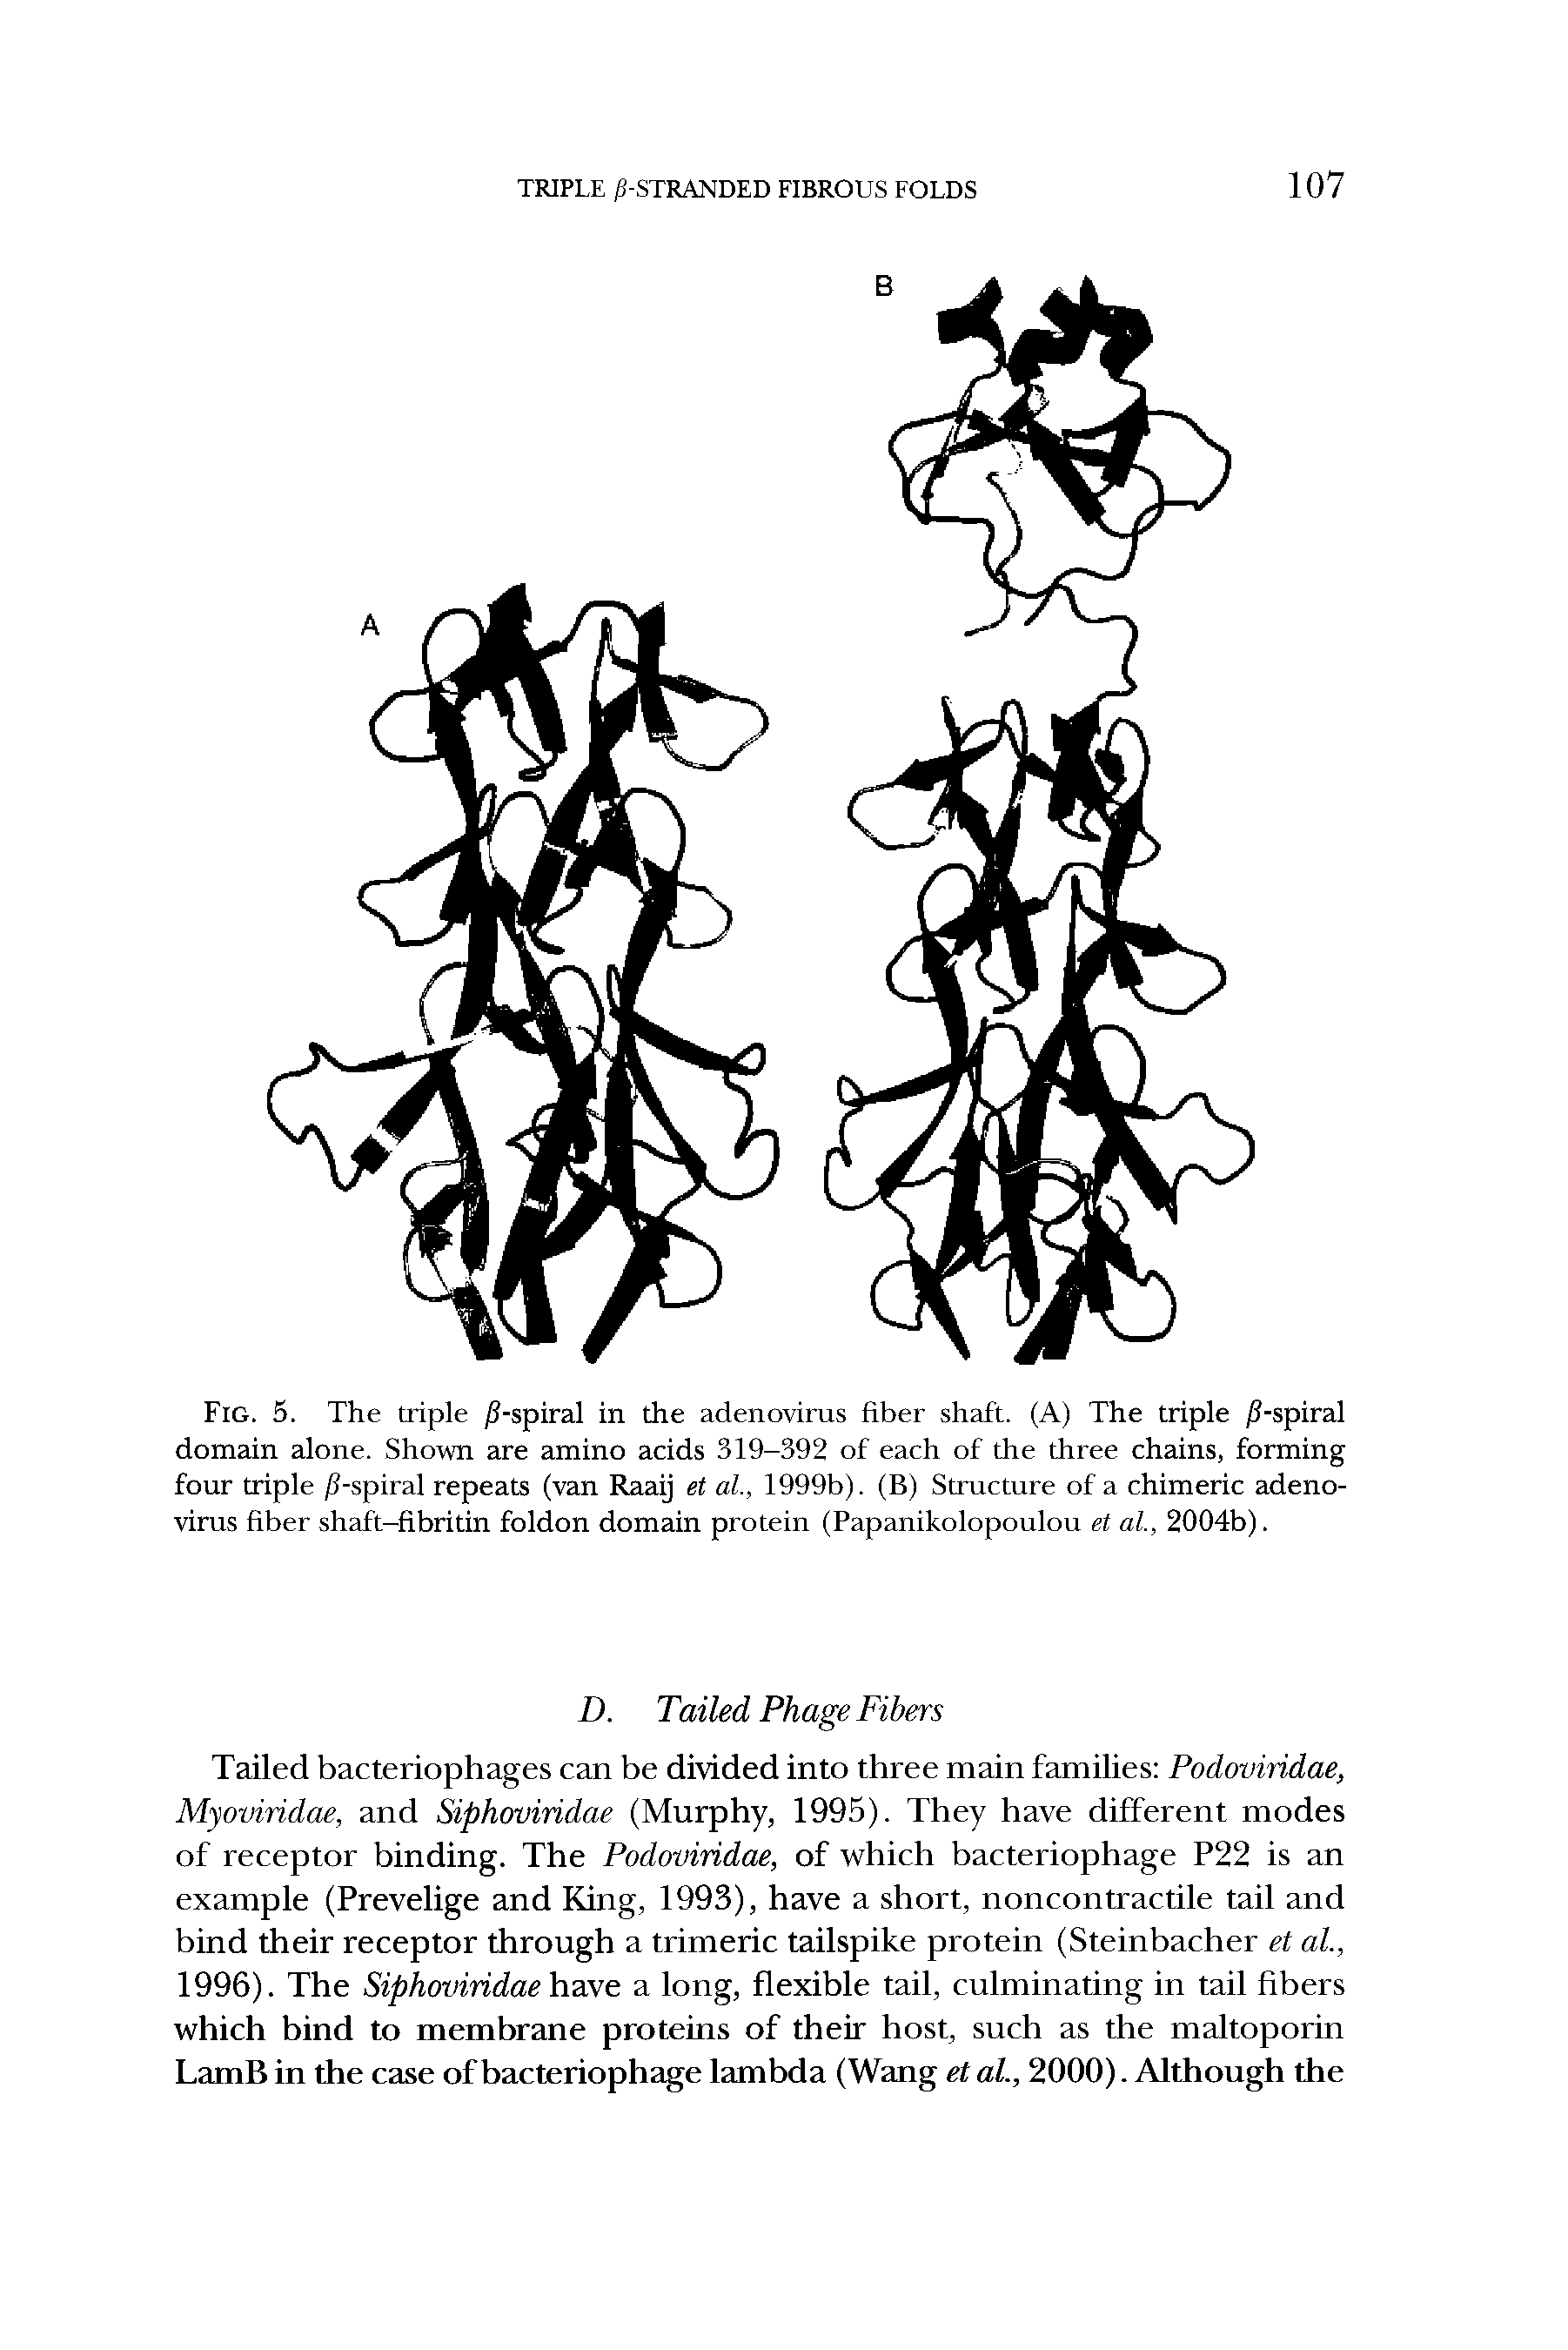 Fig. 5. The triple //-spiral in the adenovirus fiber shaft. (A) The triple //-spiral domain alone. Shown are amino acids 319-392 of each of the three chains, forming four triple /1-spiral repeats (van Raaij et al, 1999b). (B) Structure of a chimeric adenovirus fiber shaft-fibritin foldon domain protein (Papanikolopoulou et al, 2004b).